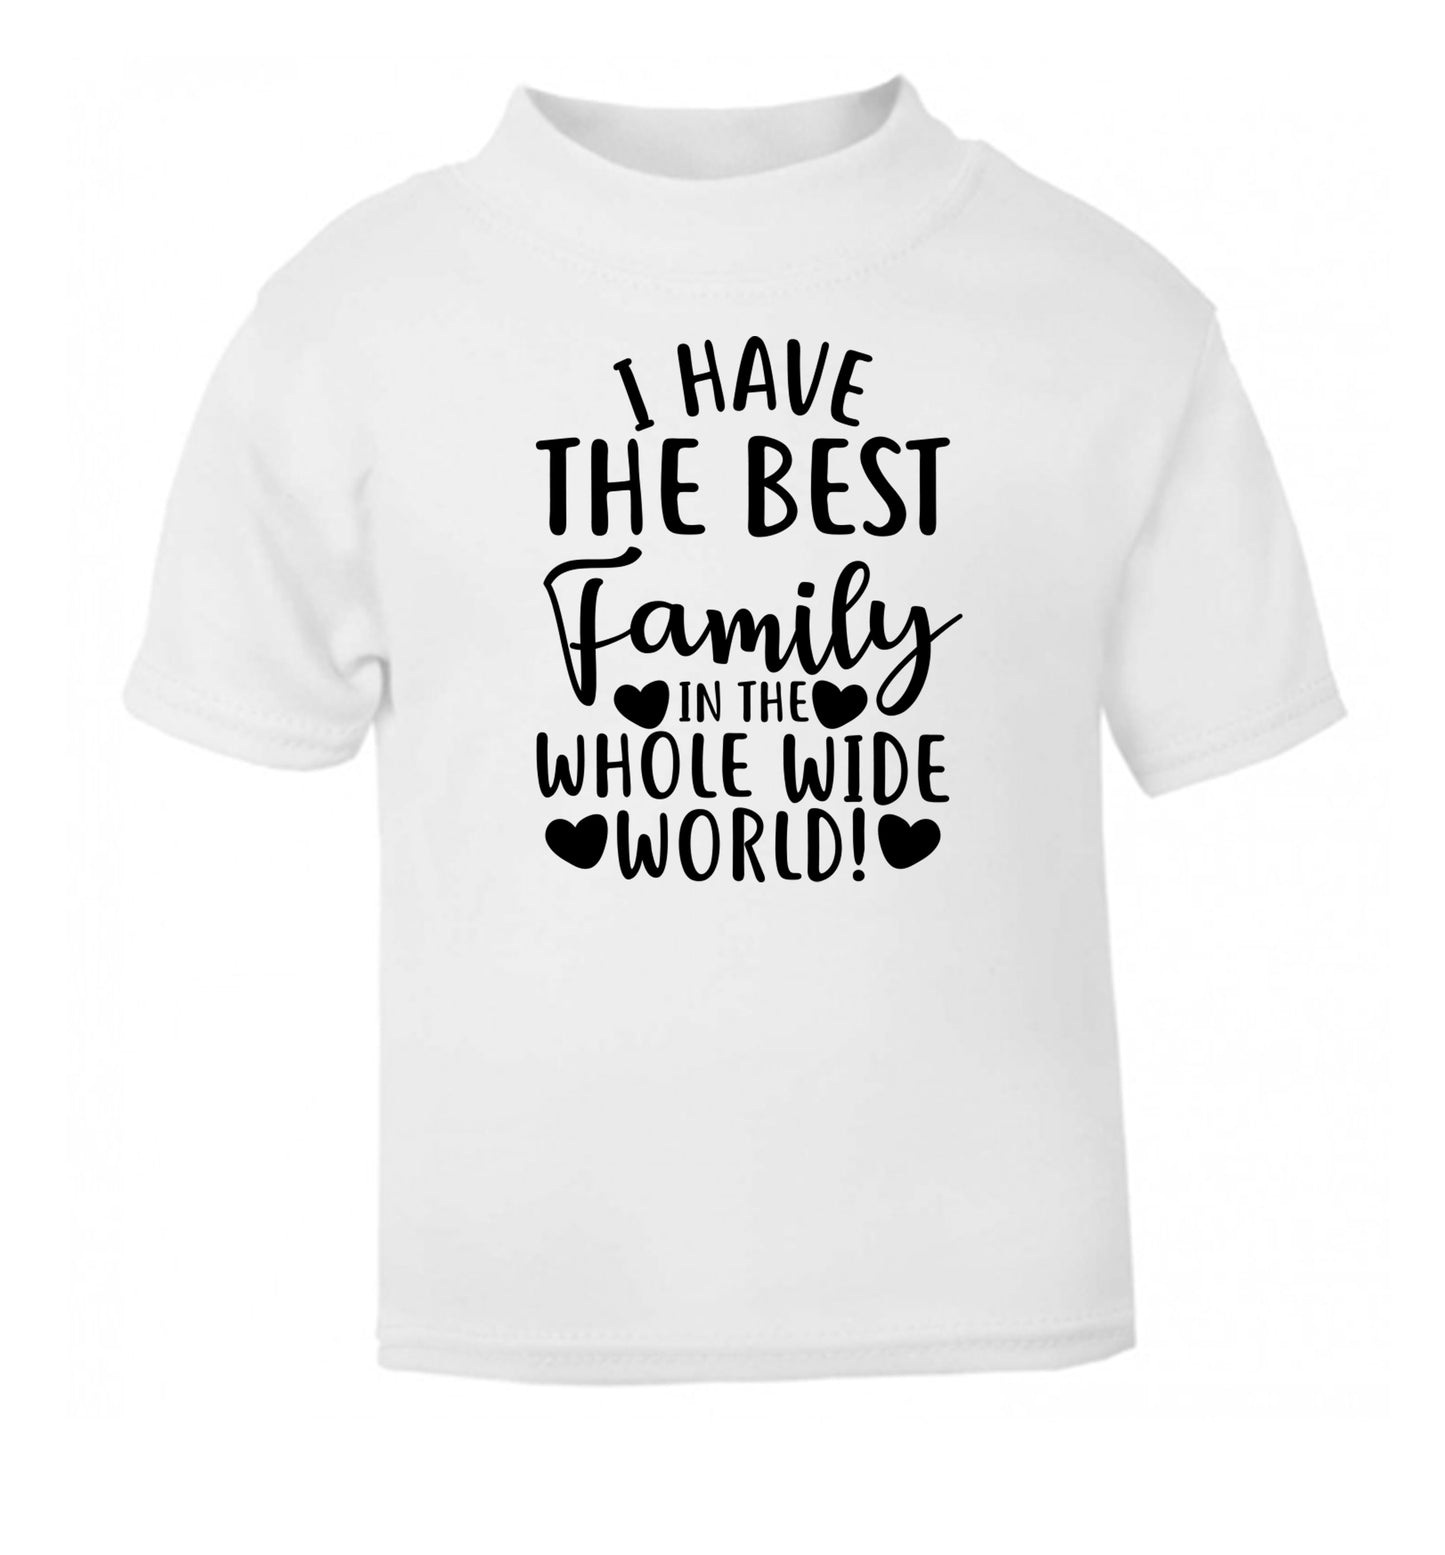 I have the best family in the whole wide world! white Baby Toddler Tshirt 2 Years